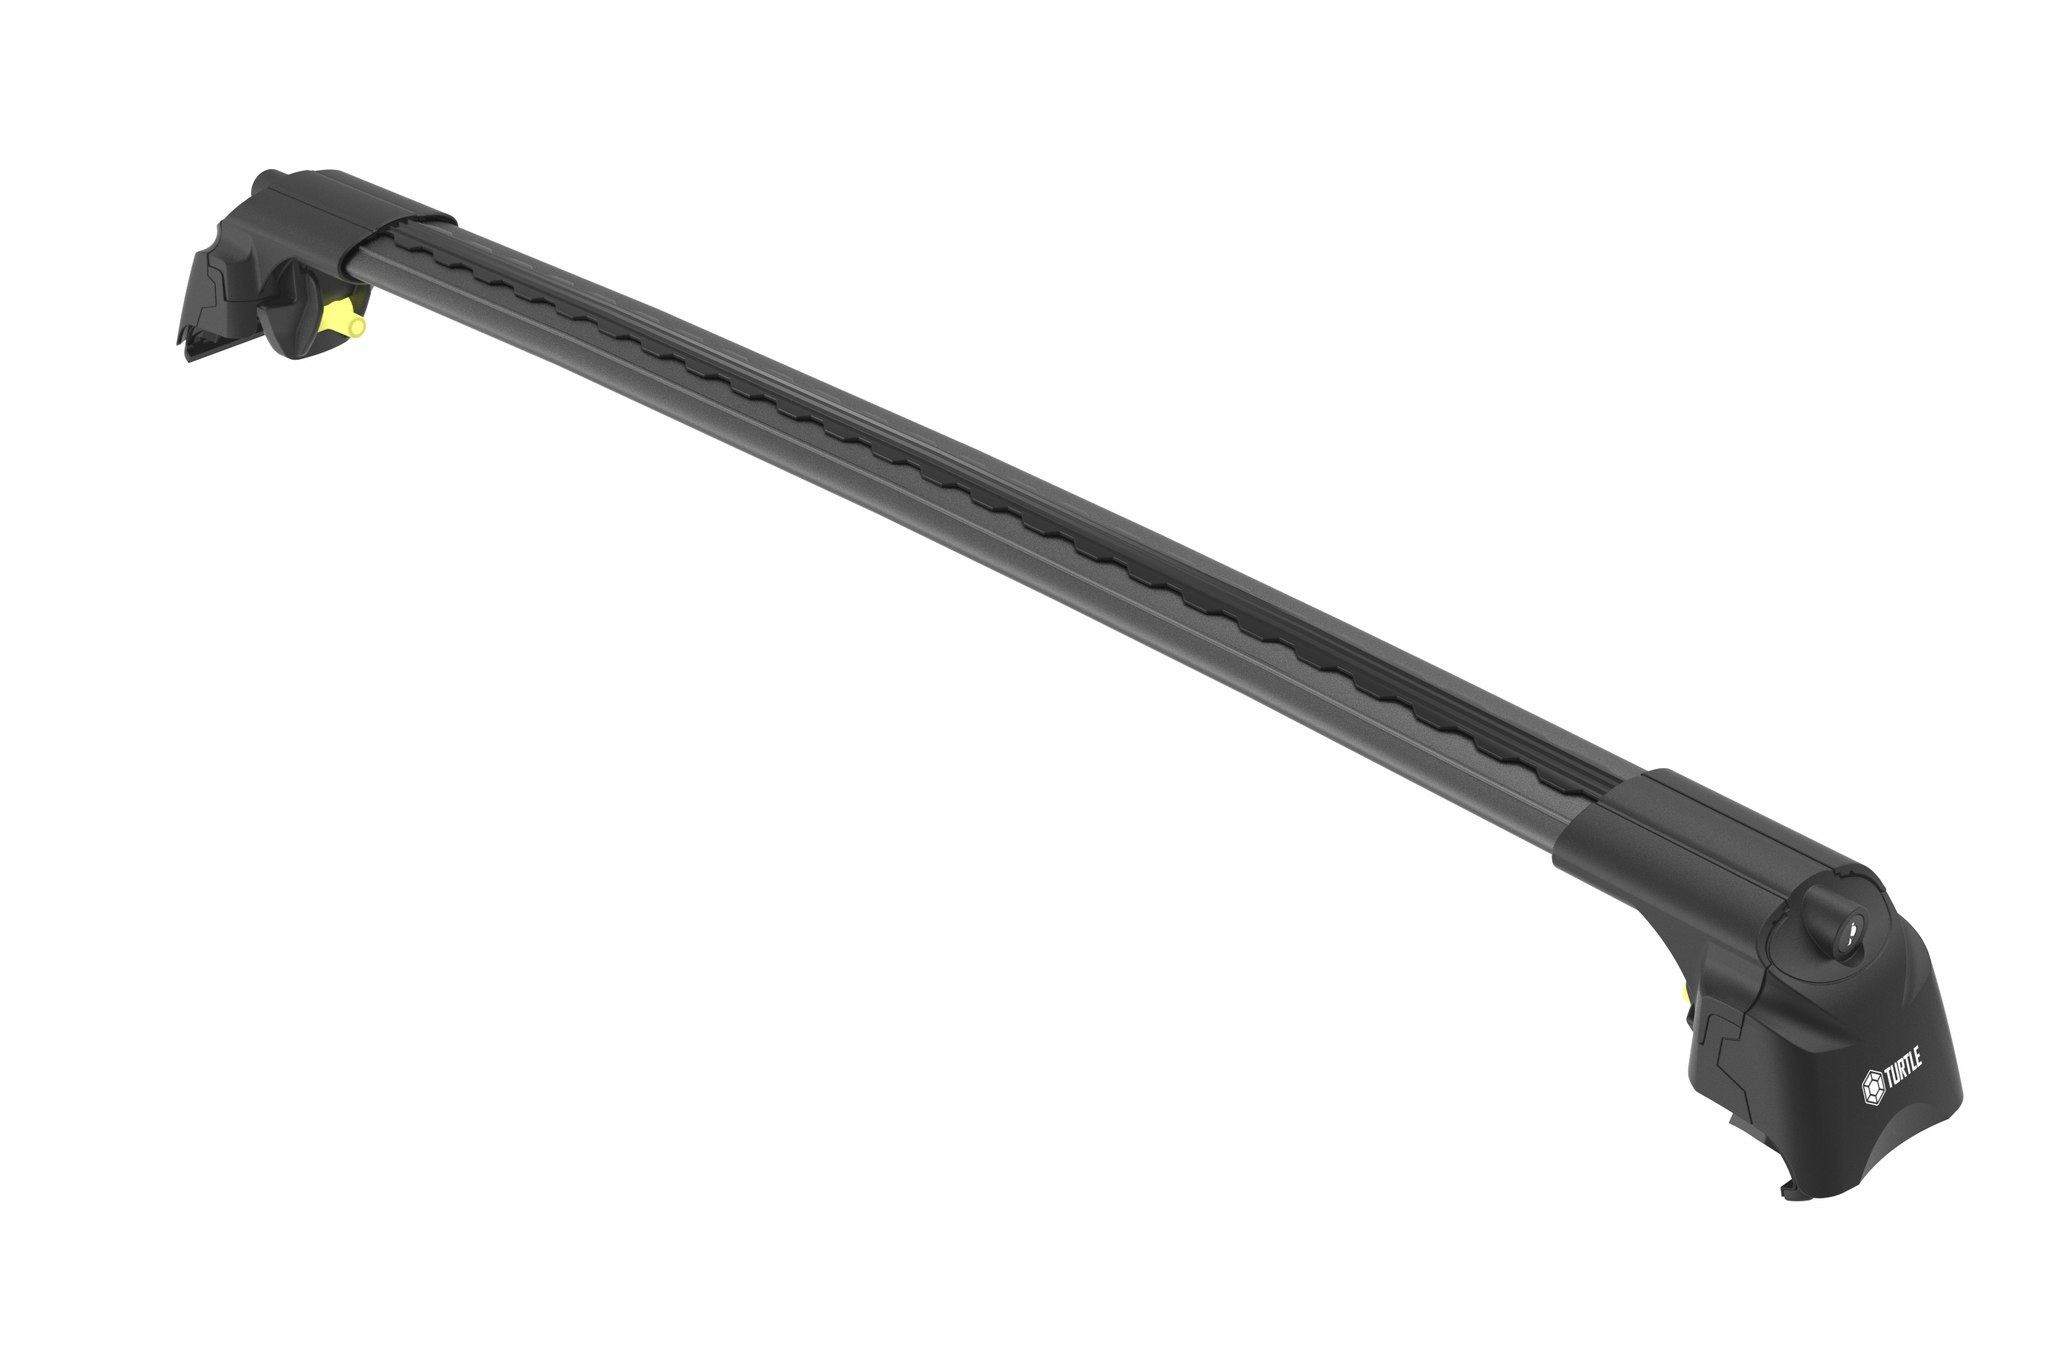 Roof rack Turtle AIR-2 for VOLVO XC60 SUV 09-17